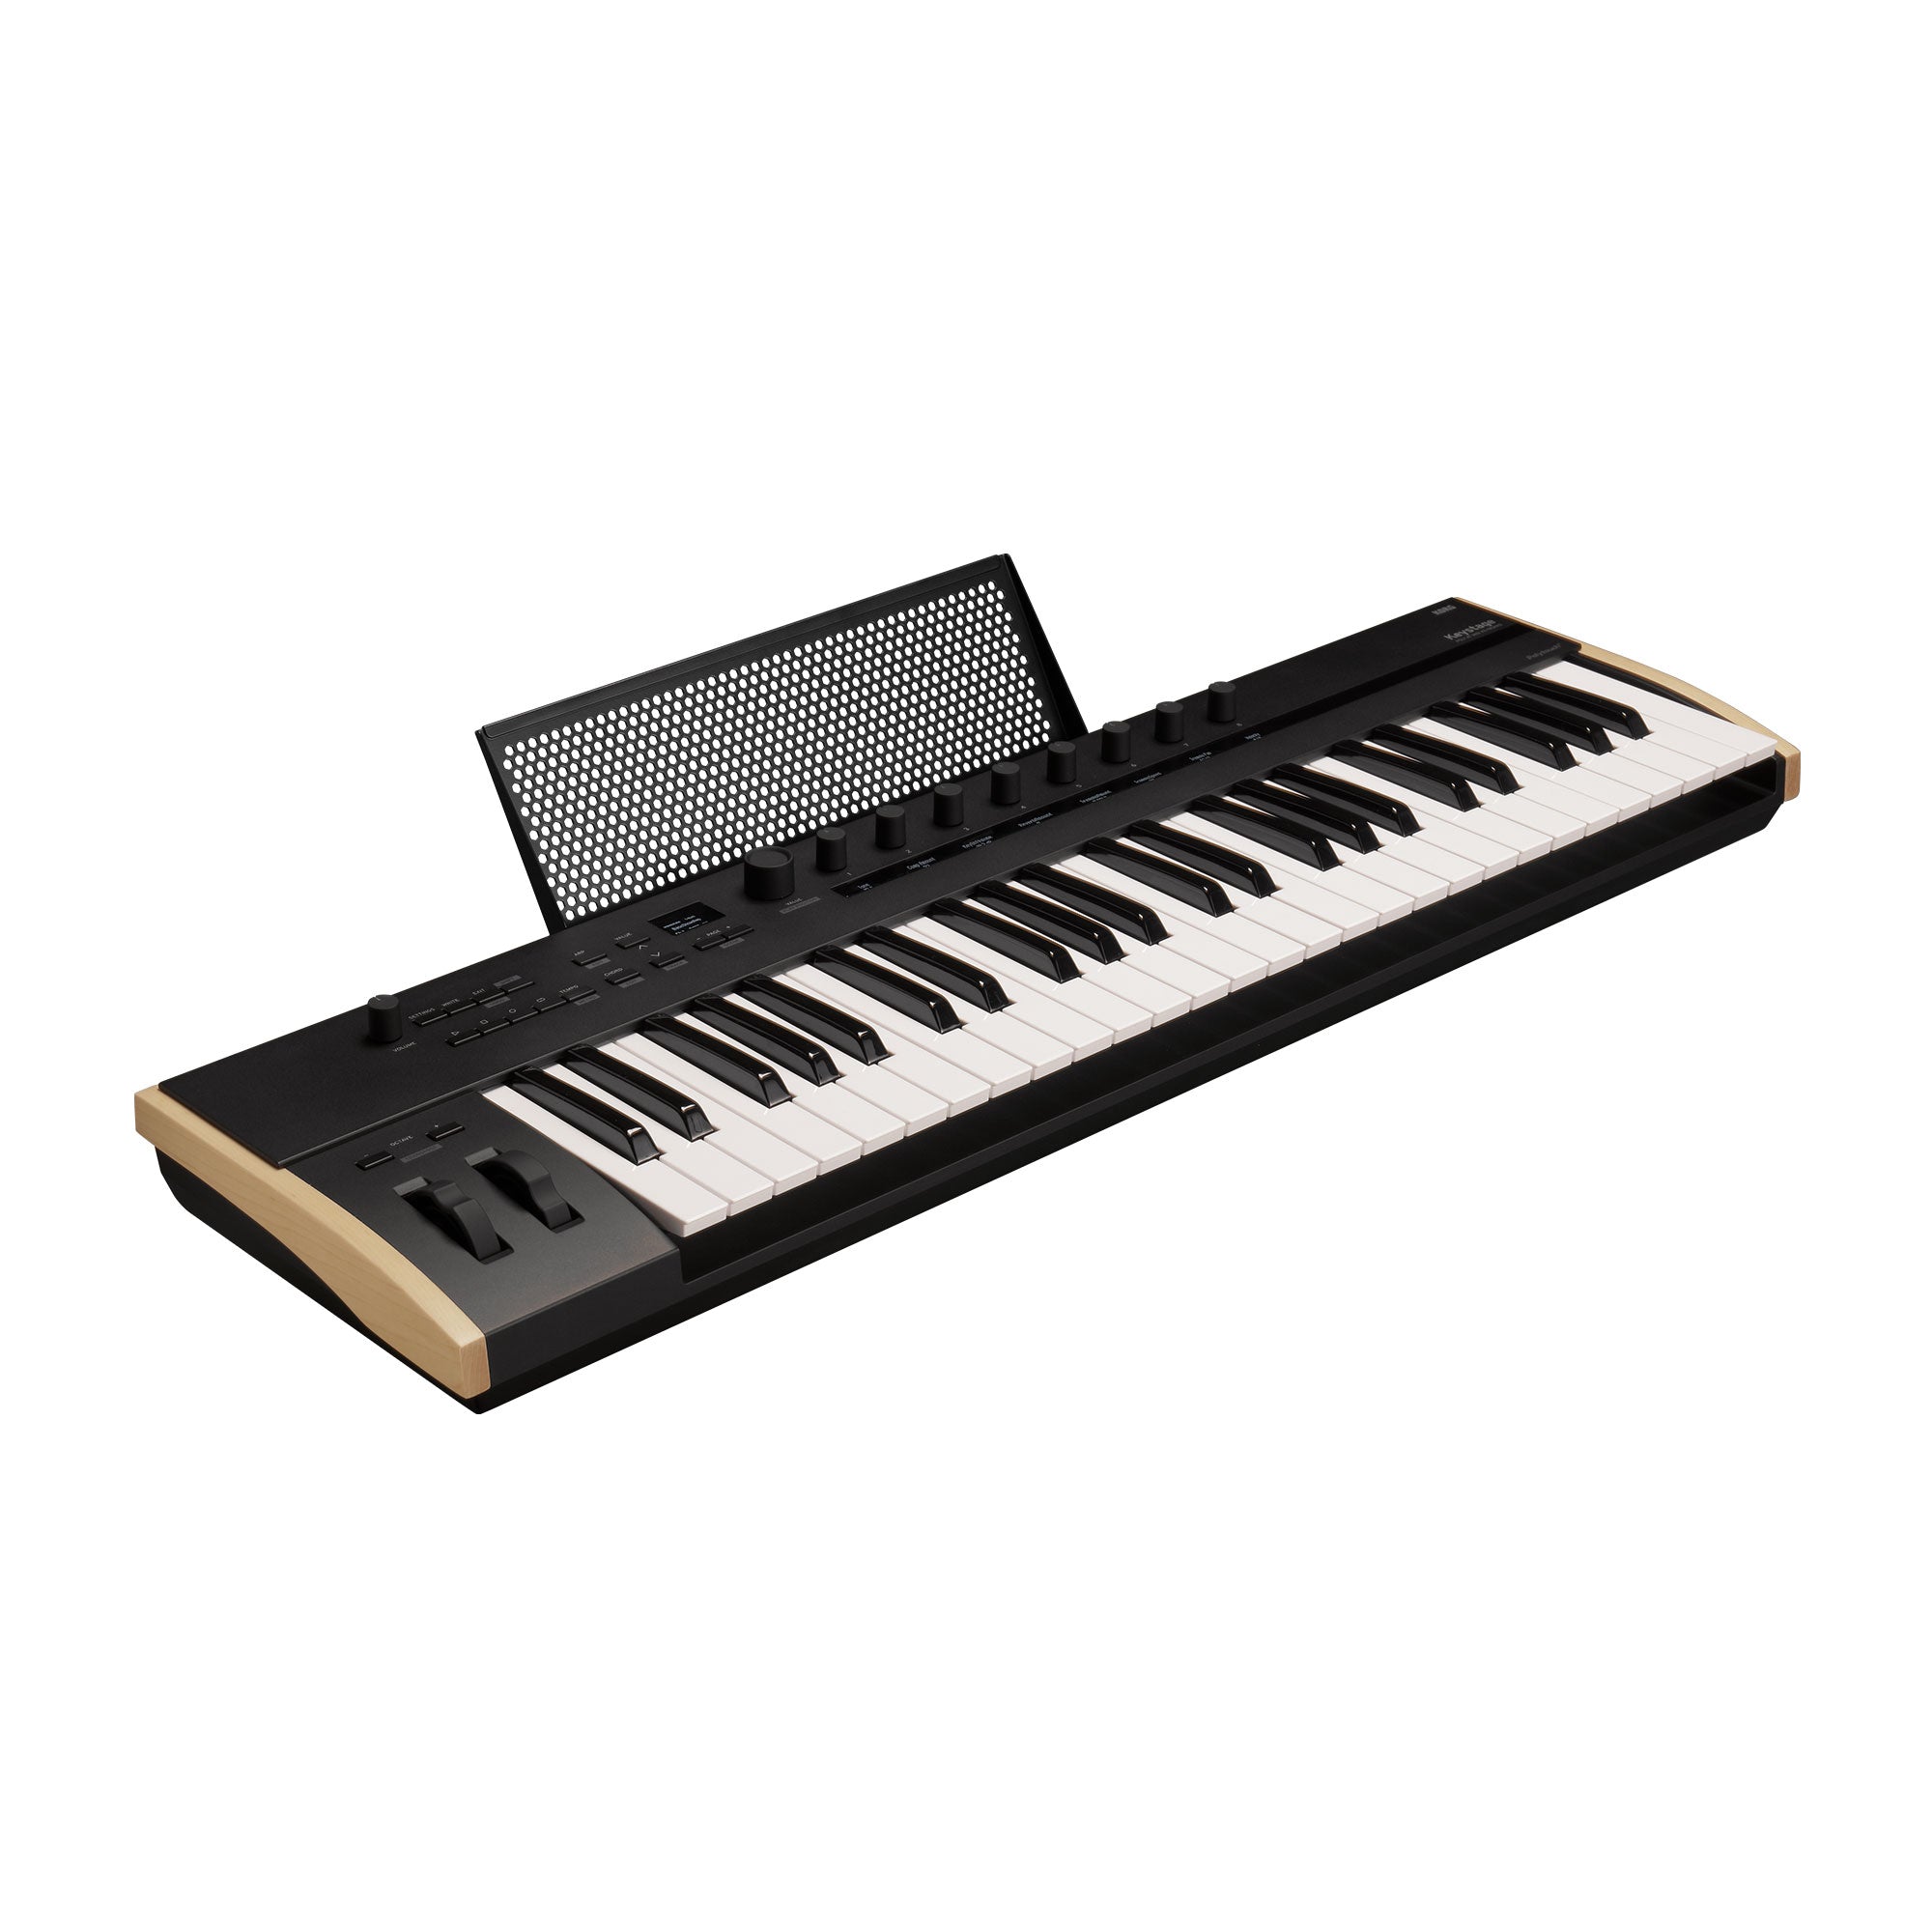 Korg Keystage 49 MIDI-Controller with Polyphonic Aftertouch